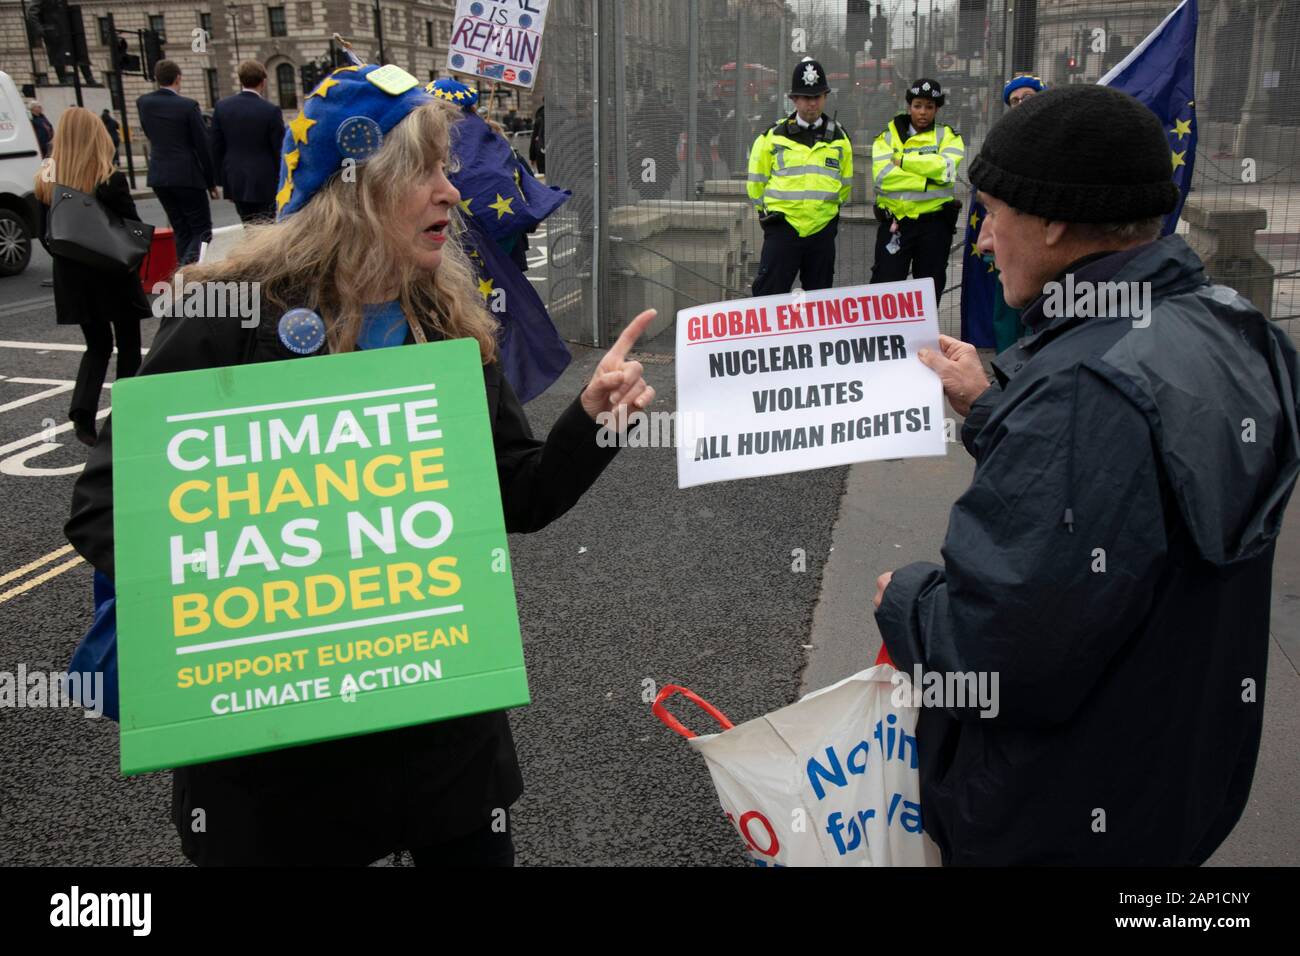 Brexit protesters discuss climate change and nuclear power in Westminster outside Parliament on 8th January 2020 in London, England, United Kingdom. With a majority Conservative government in power and Brexit day at the end of January looming, the role of these protesters is now to demonstrate in the hope of the softest Brexit deal possible. Stock Photo